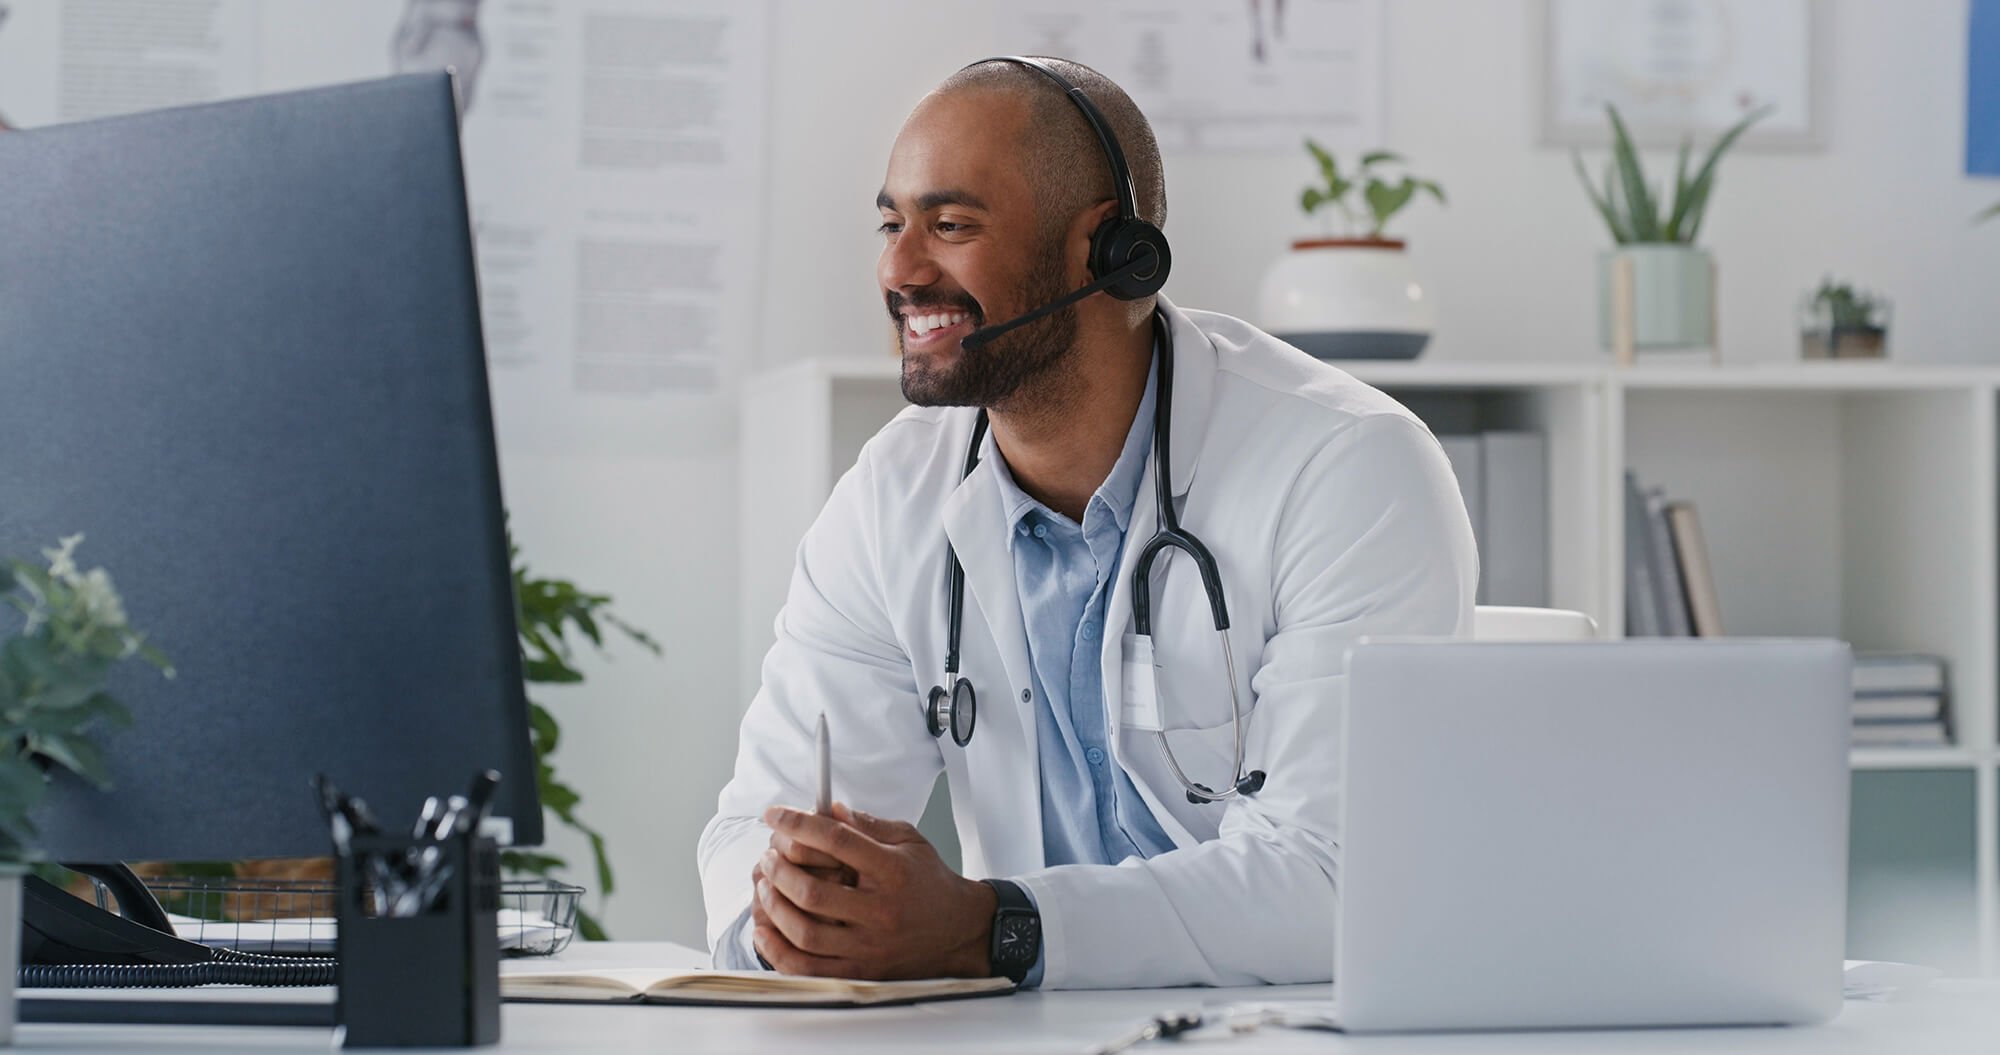 A medical professional wearing a headset and smiling.